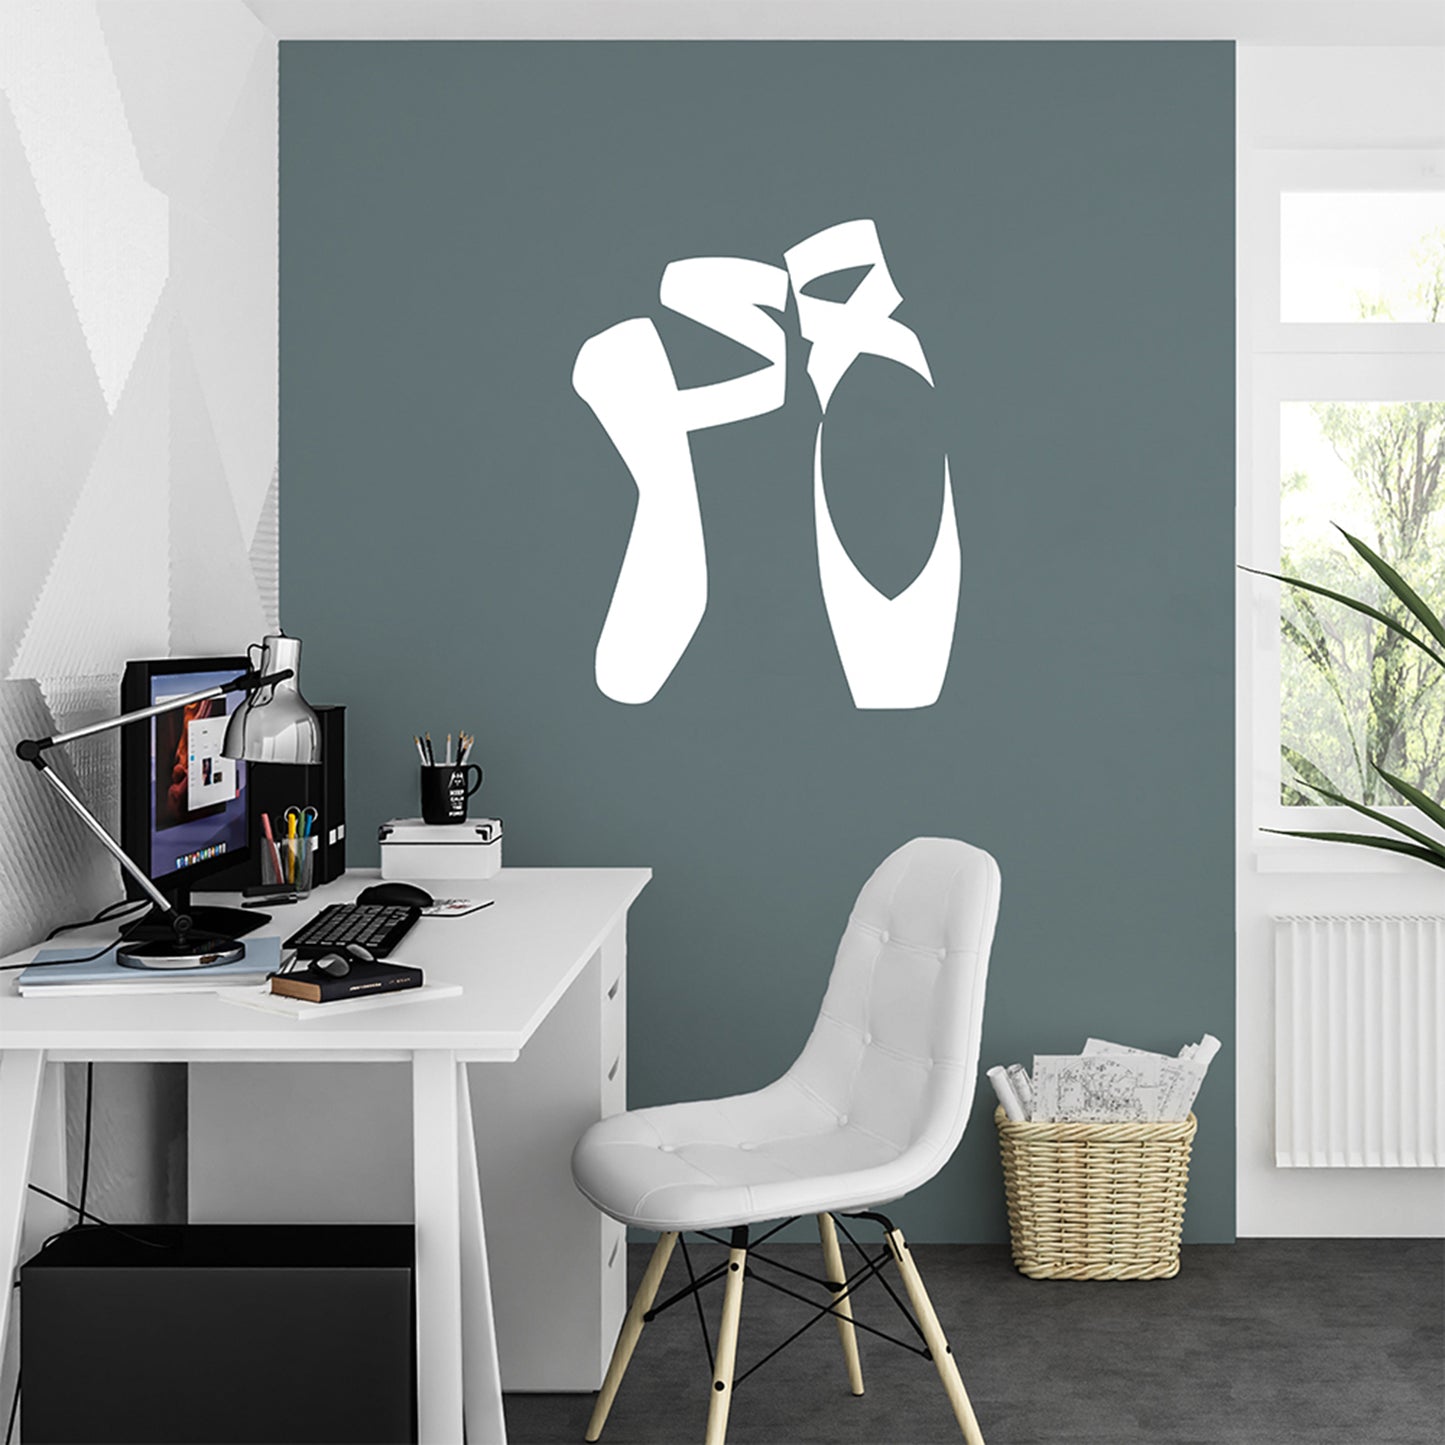 Ballet shoes | Wall decal